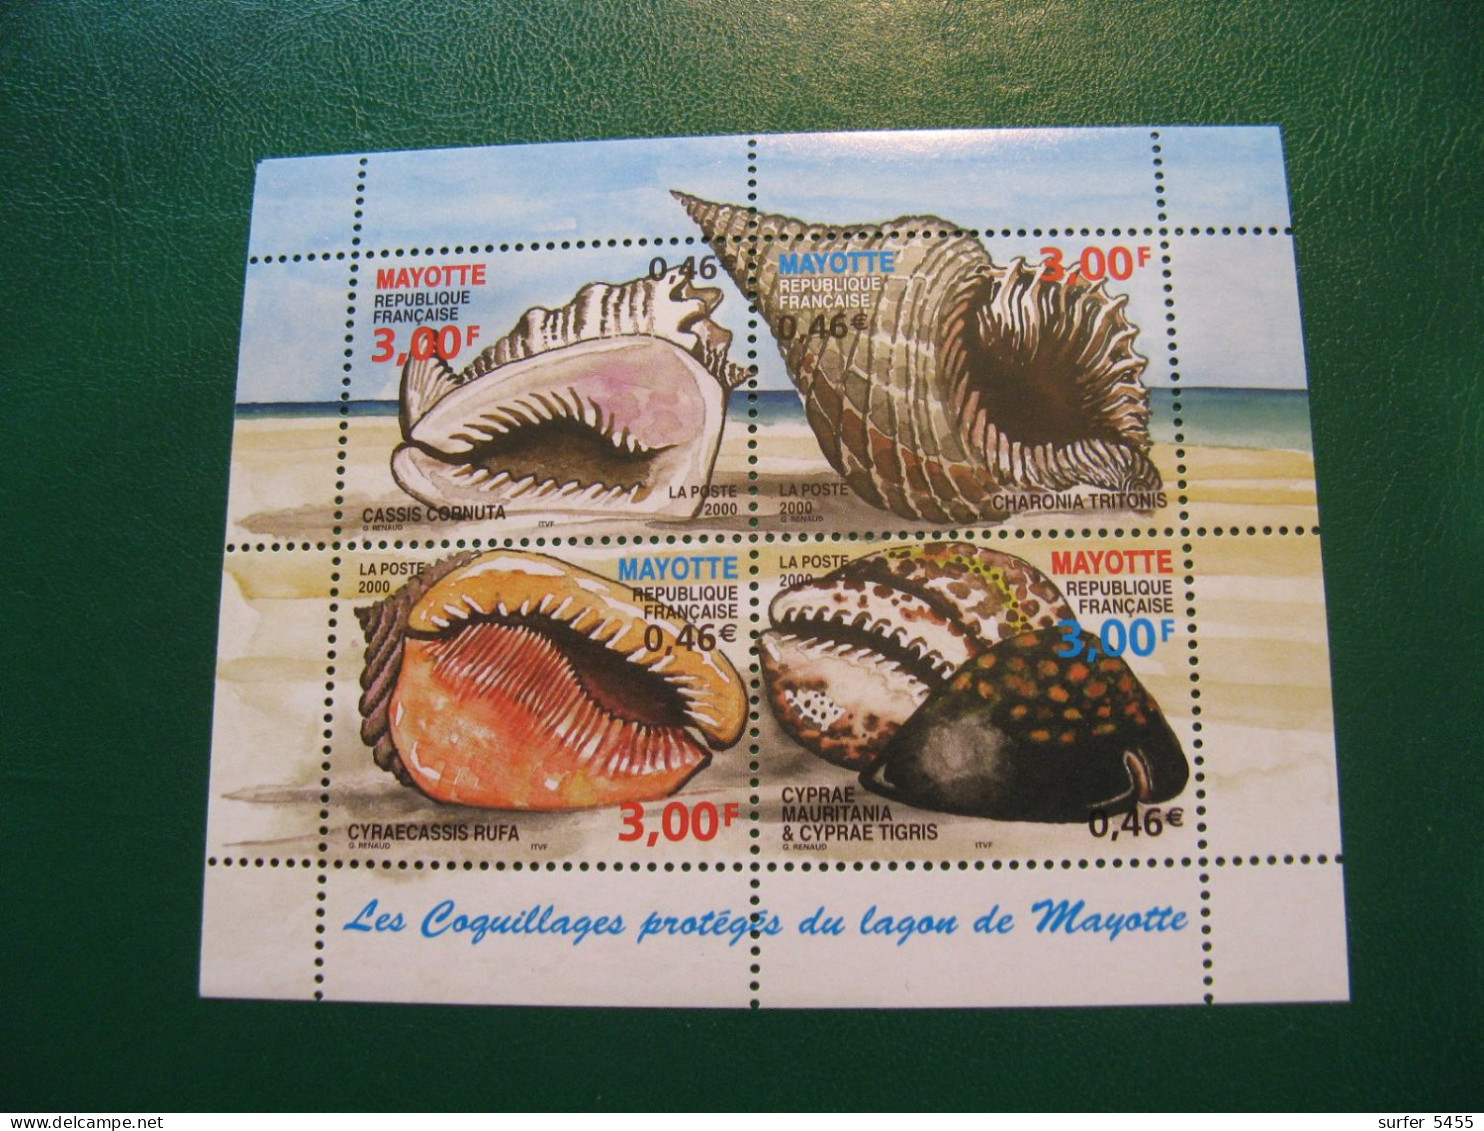 MAYOTTE BLOC FEUILLET N° 4 NEUF** LUXE - MNH - COTE 16,00 EUROS - Nuevos